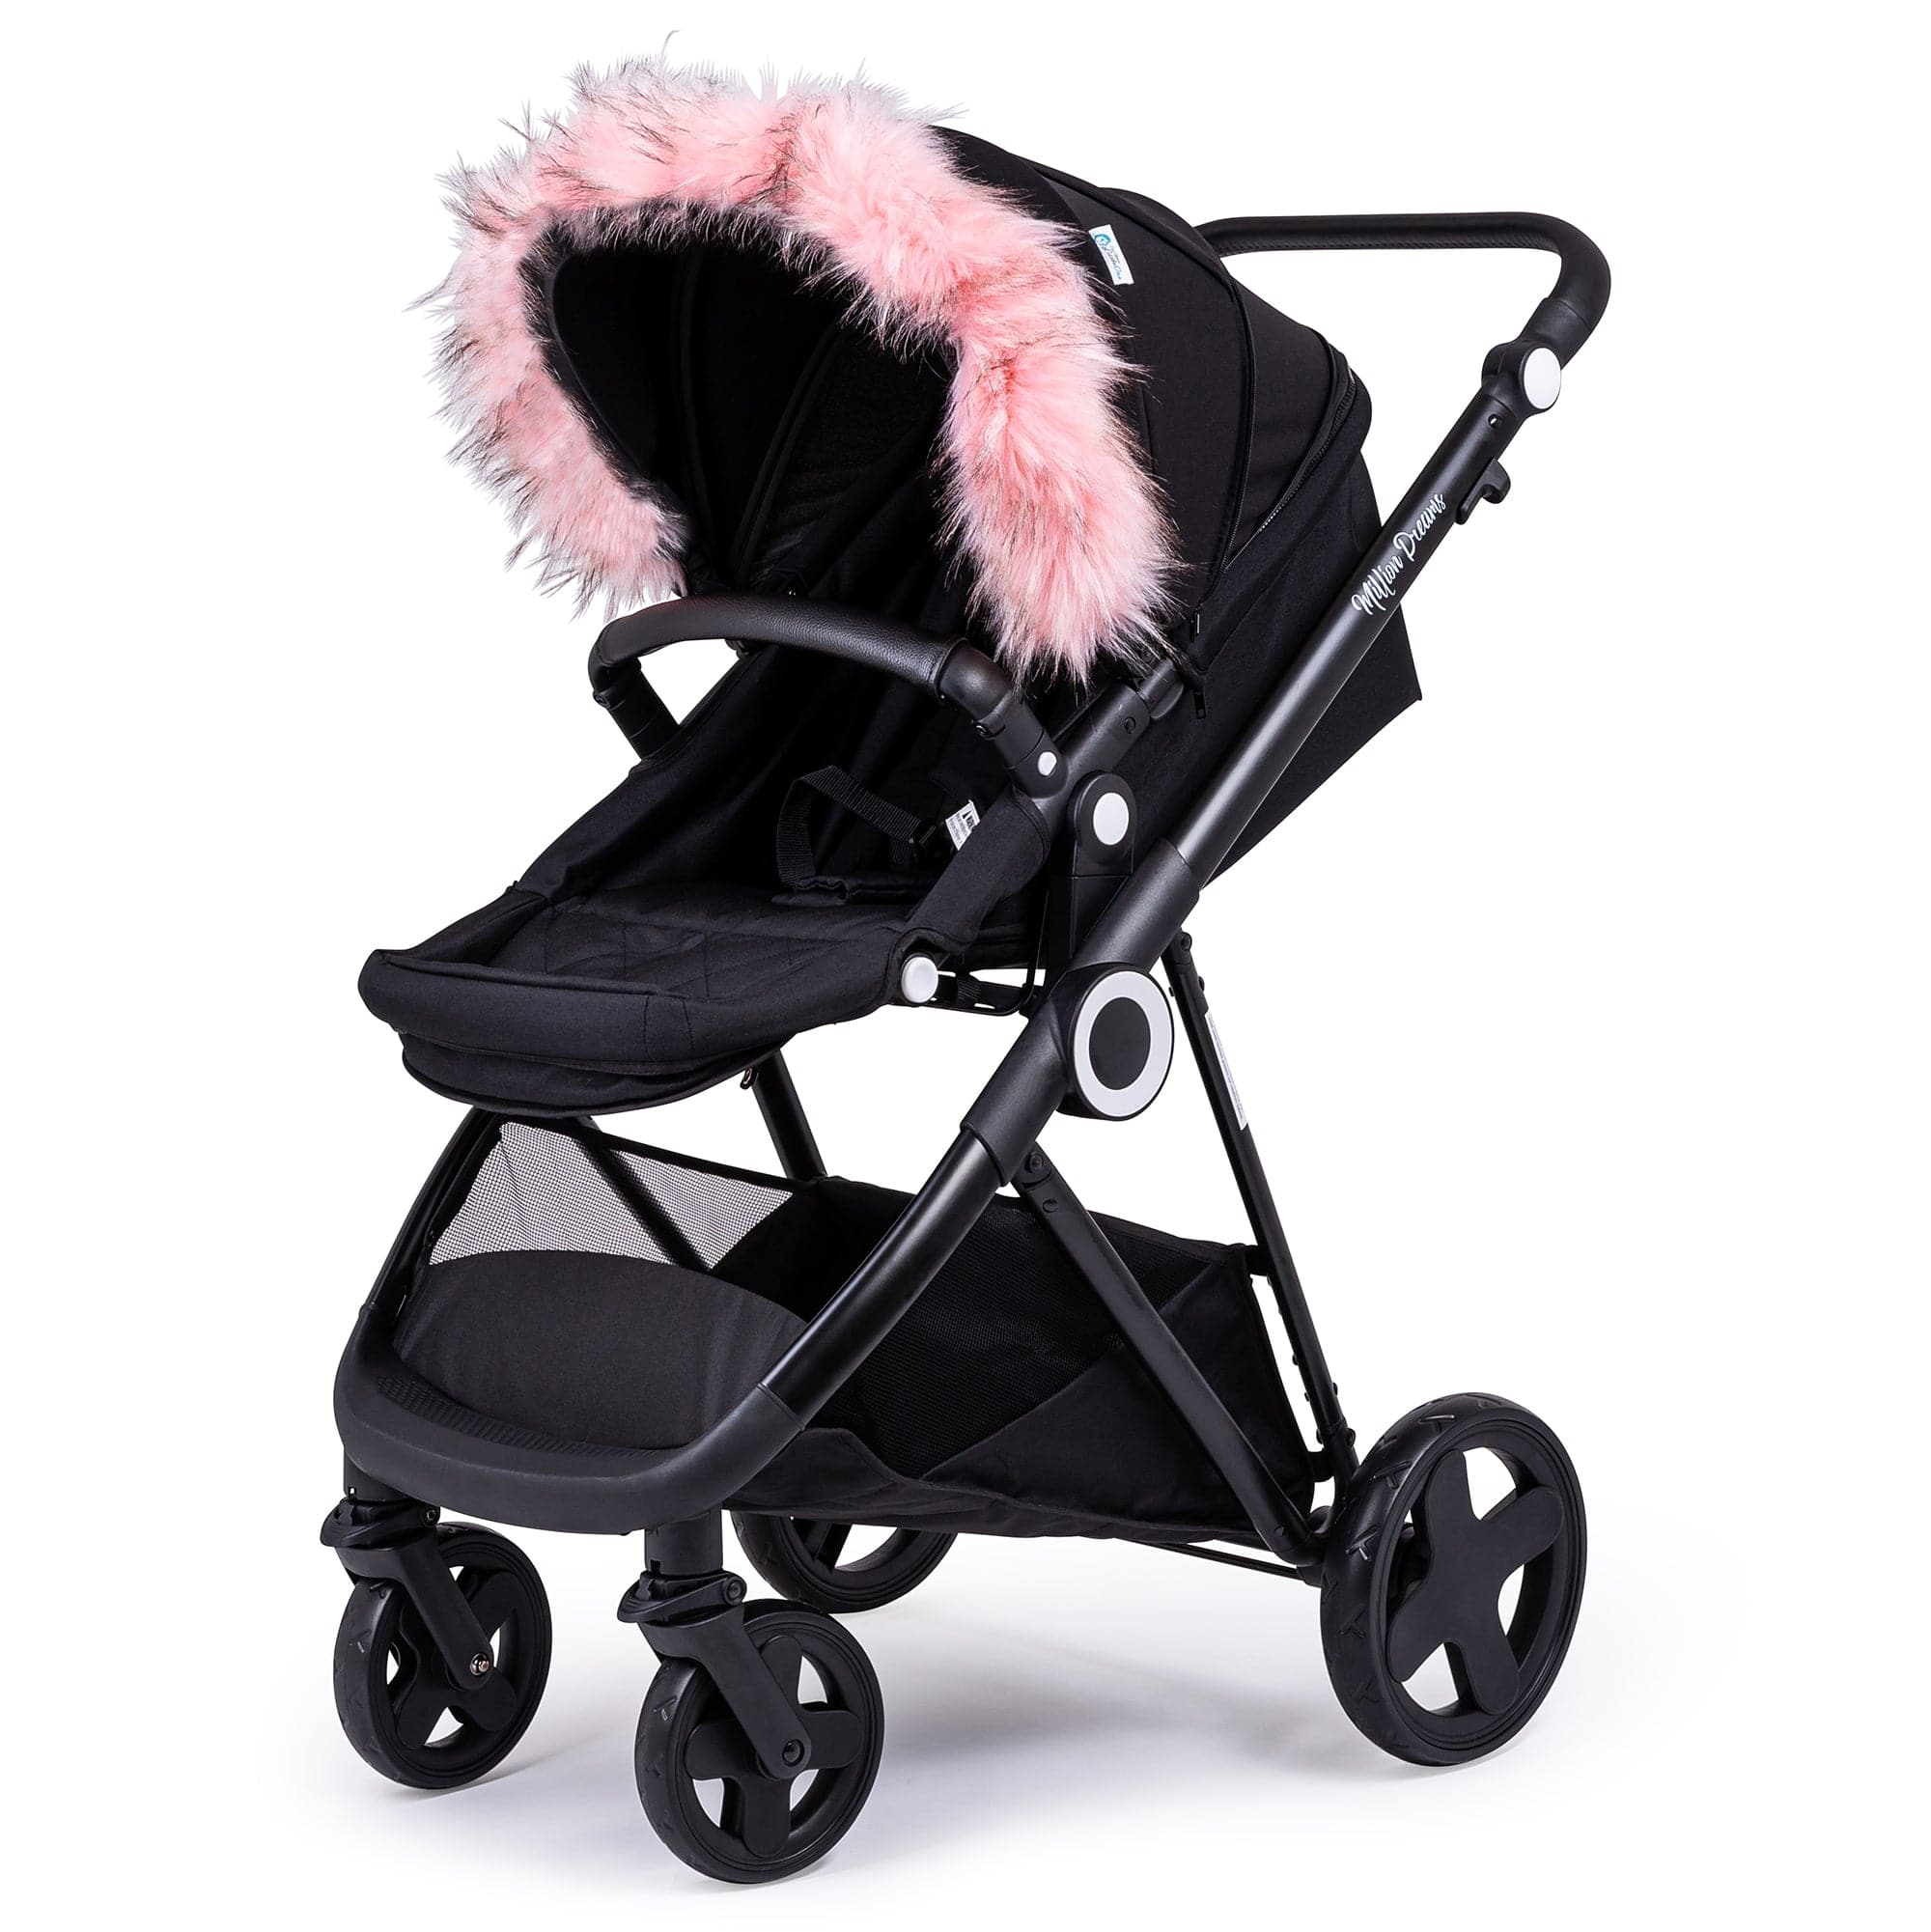 Pram Fur Hood Trim Attachment for Pushchair Compatible with Out 'n' About - Light Pink / Fits All Models | For Your Little One